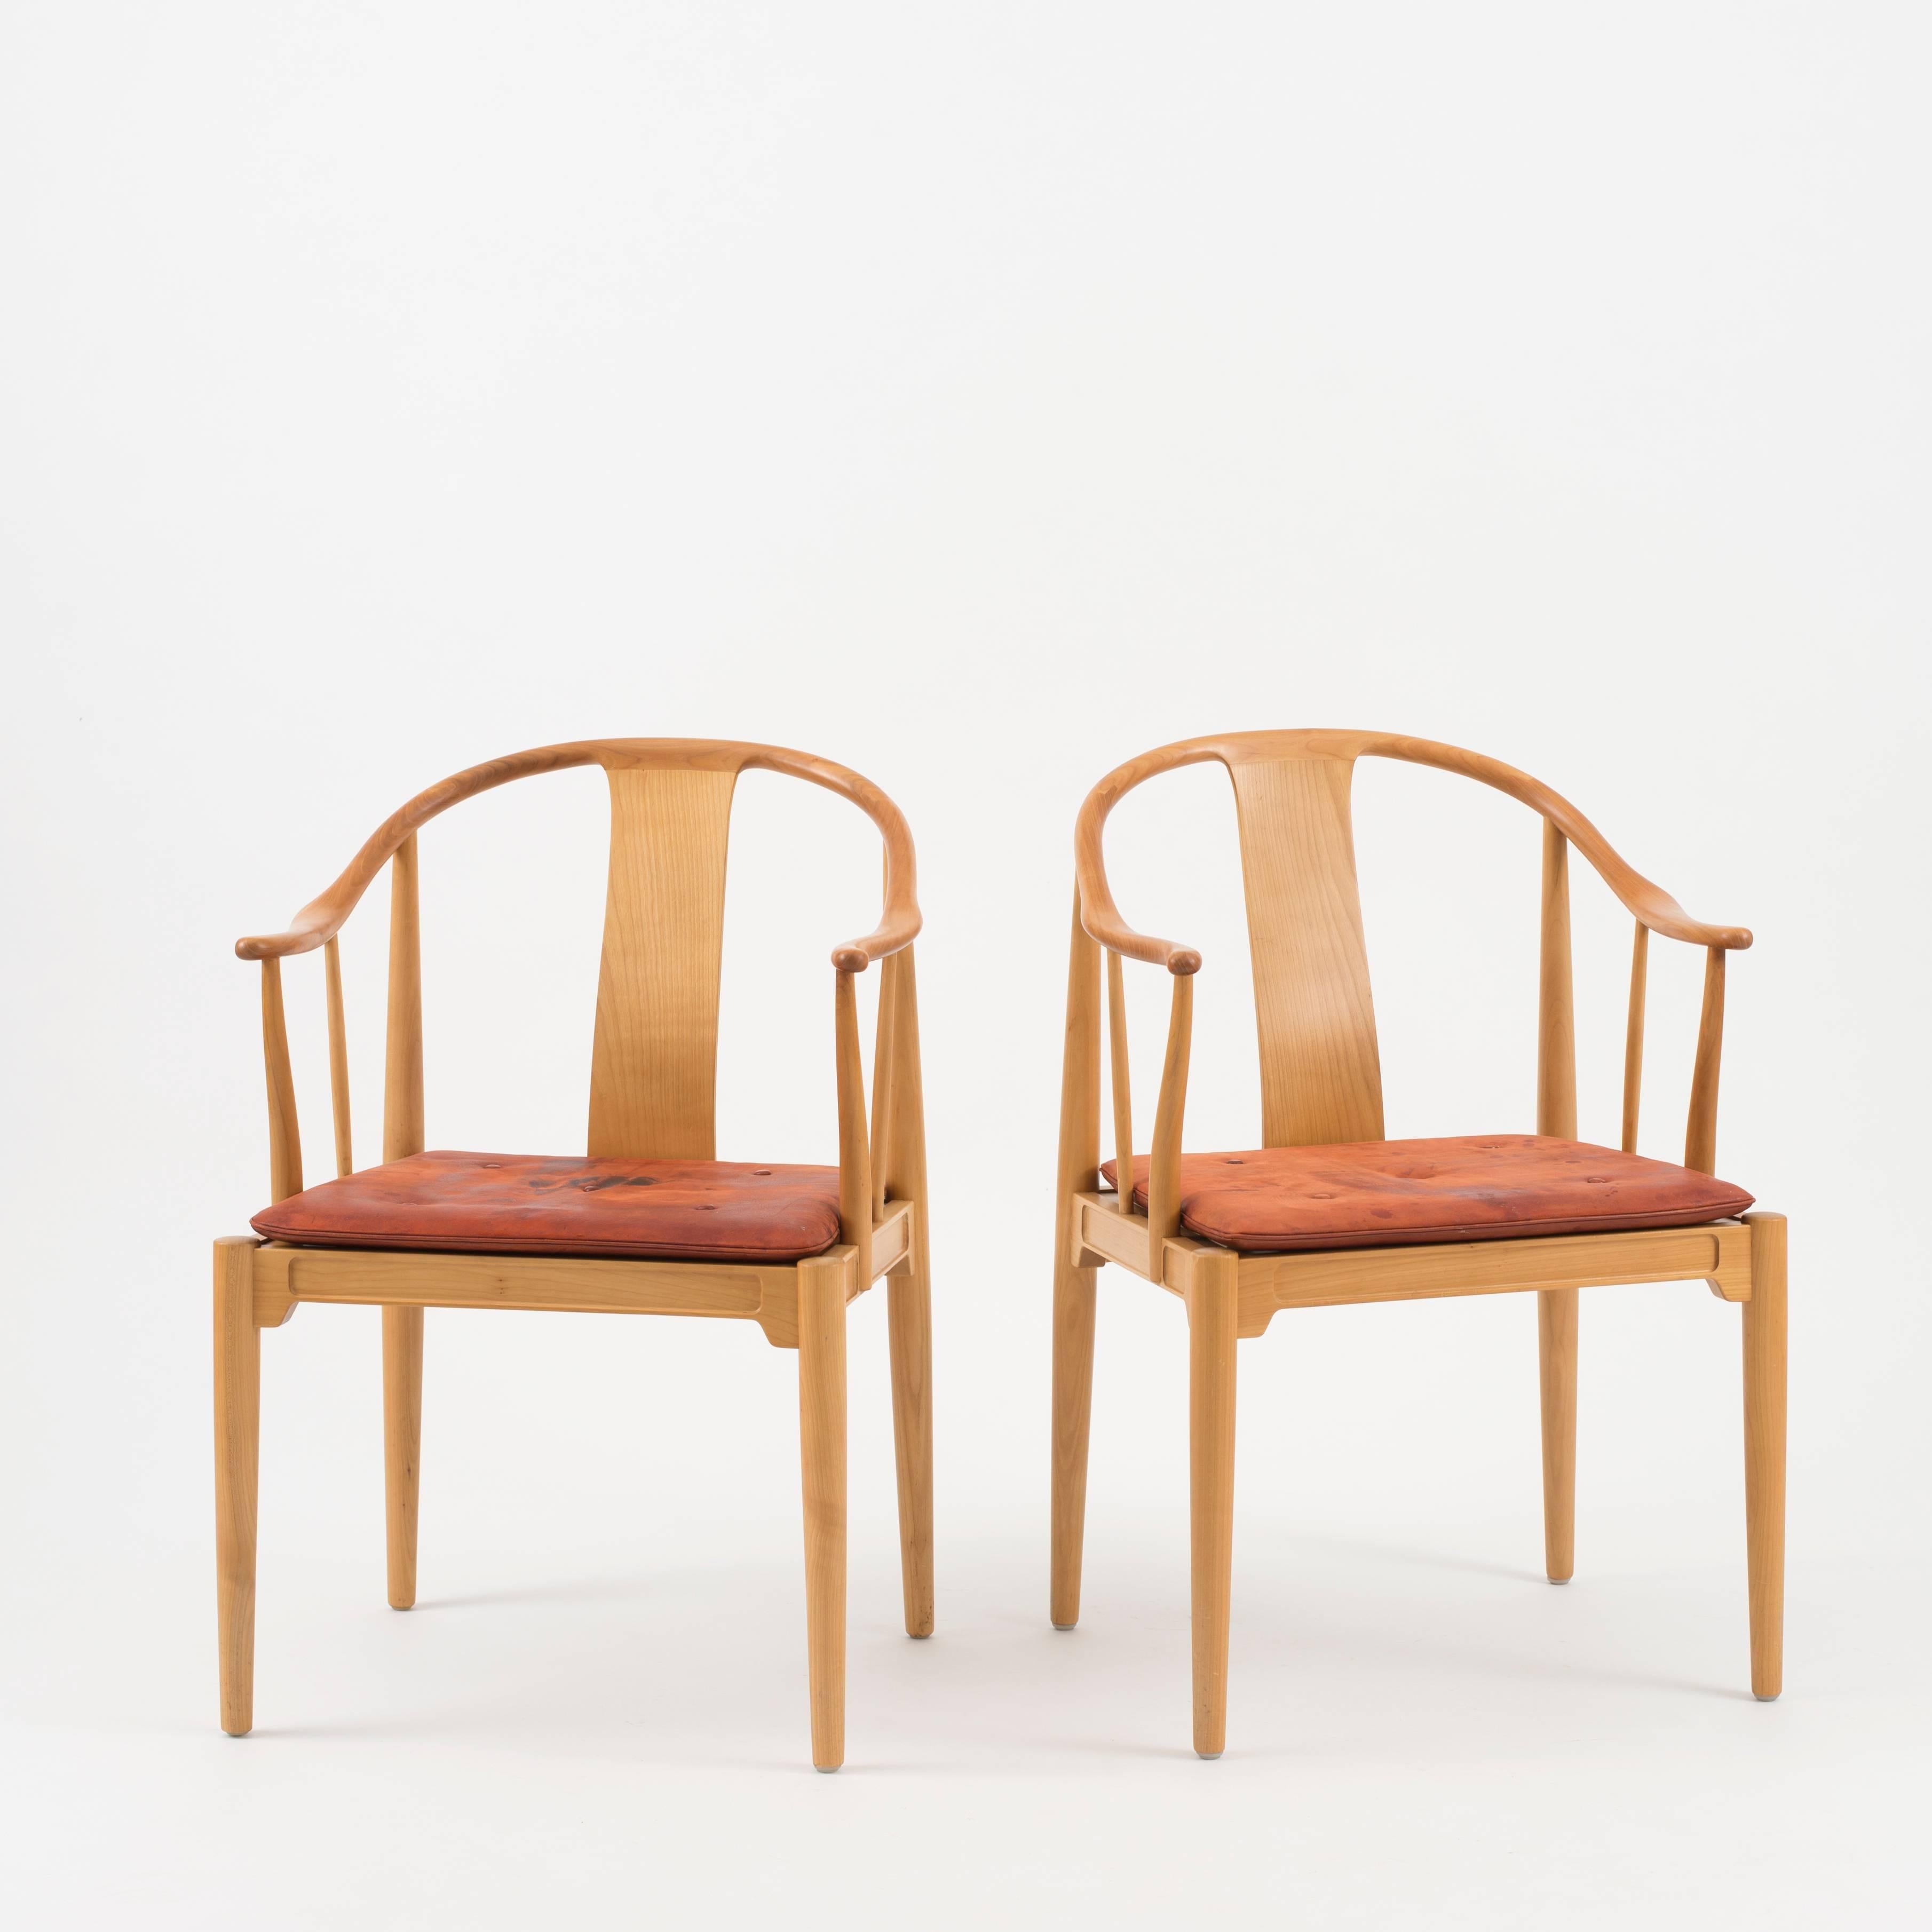 A pair of Hans J. Wegner China chairs in cherrywood. Executed by Fritz Hansen, 1968.